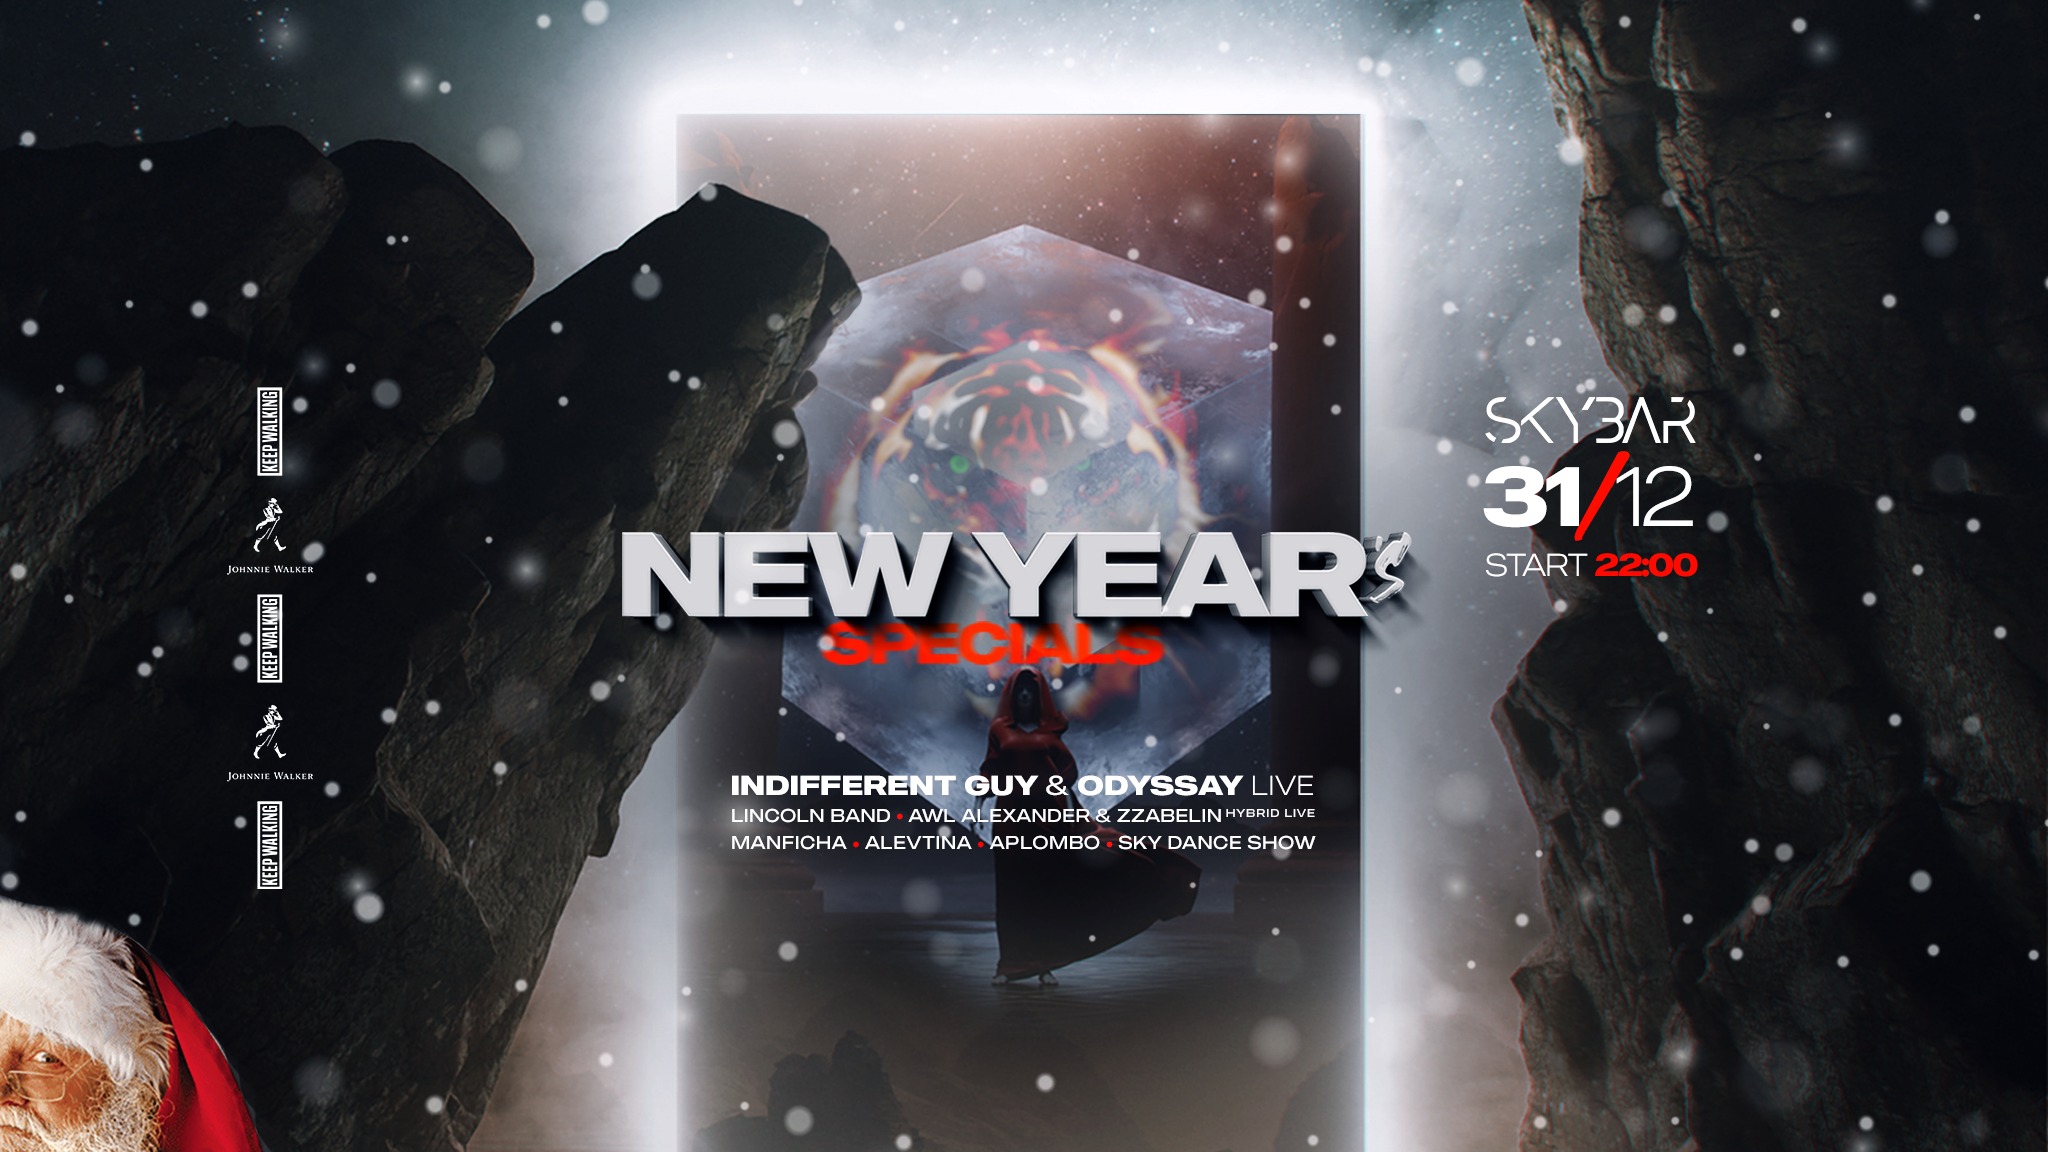 Skybar: New Year’s Specials with Indifferent Guy & ODYSSAY LIVE